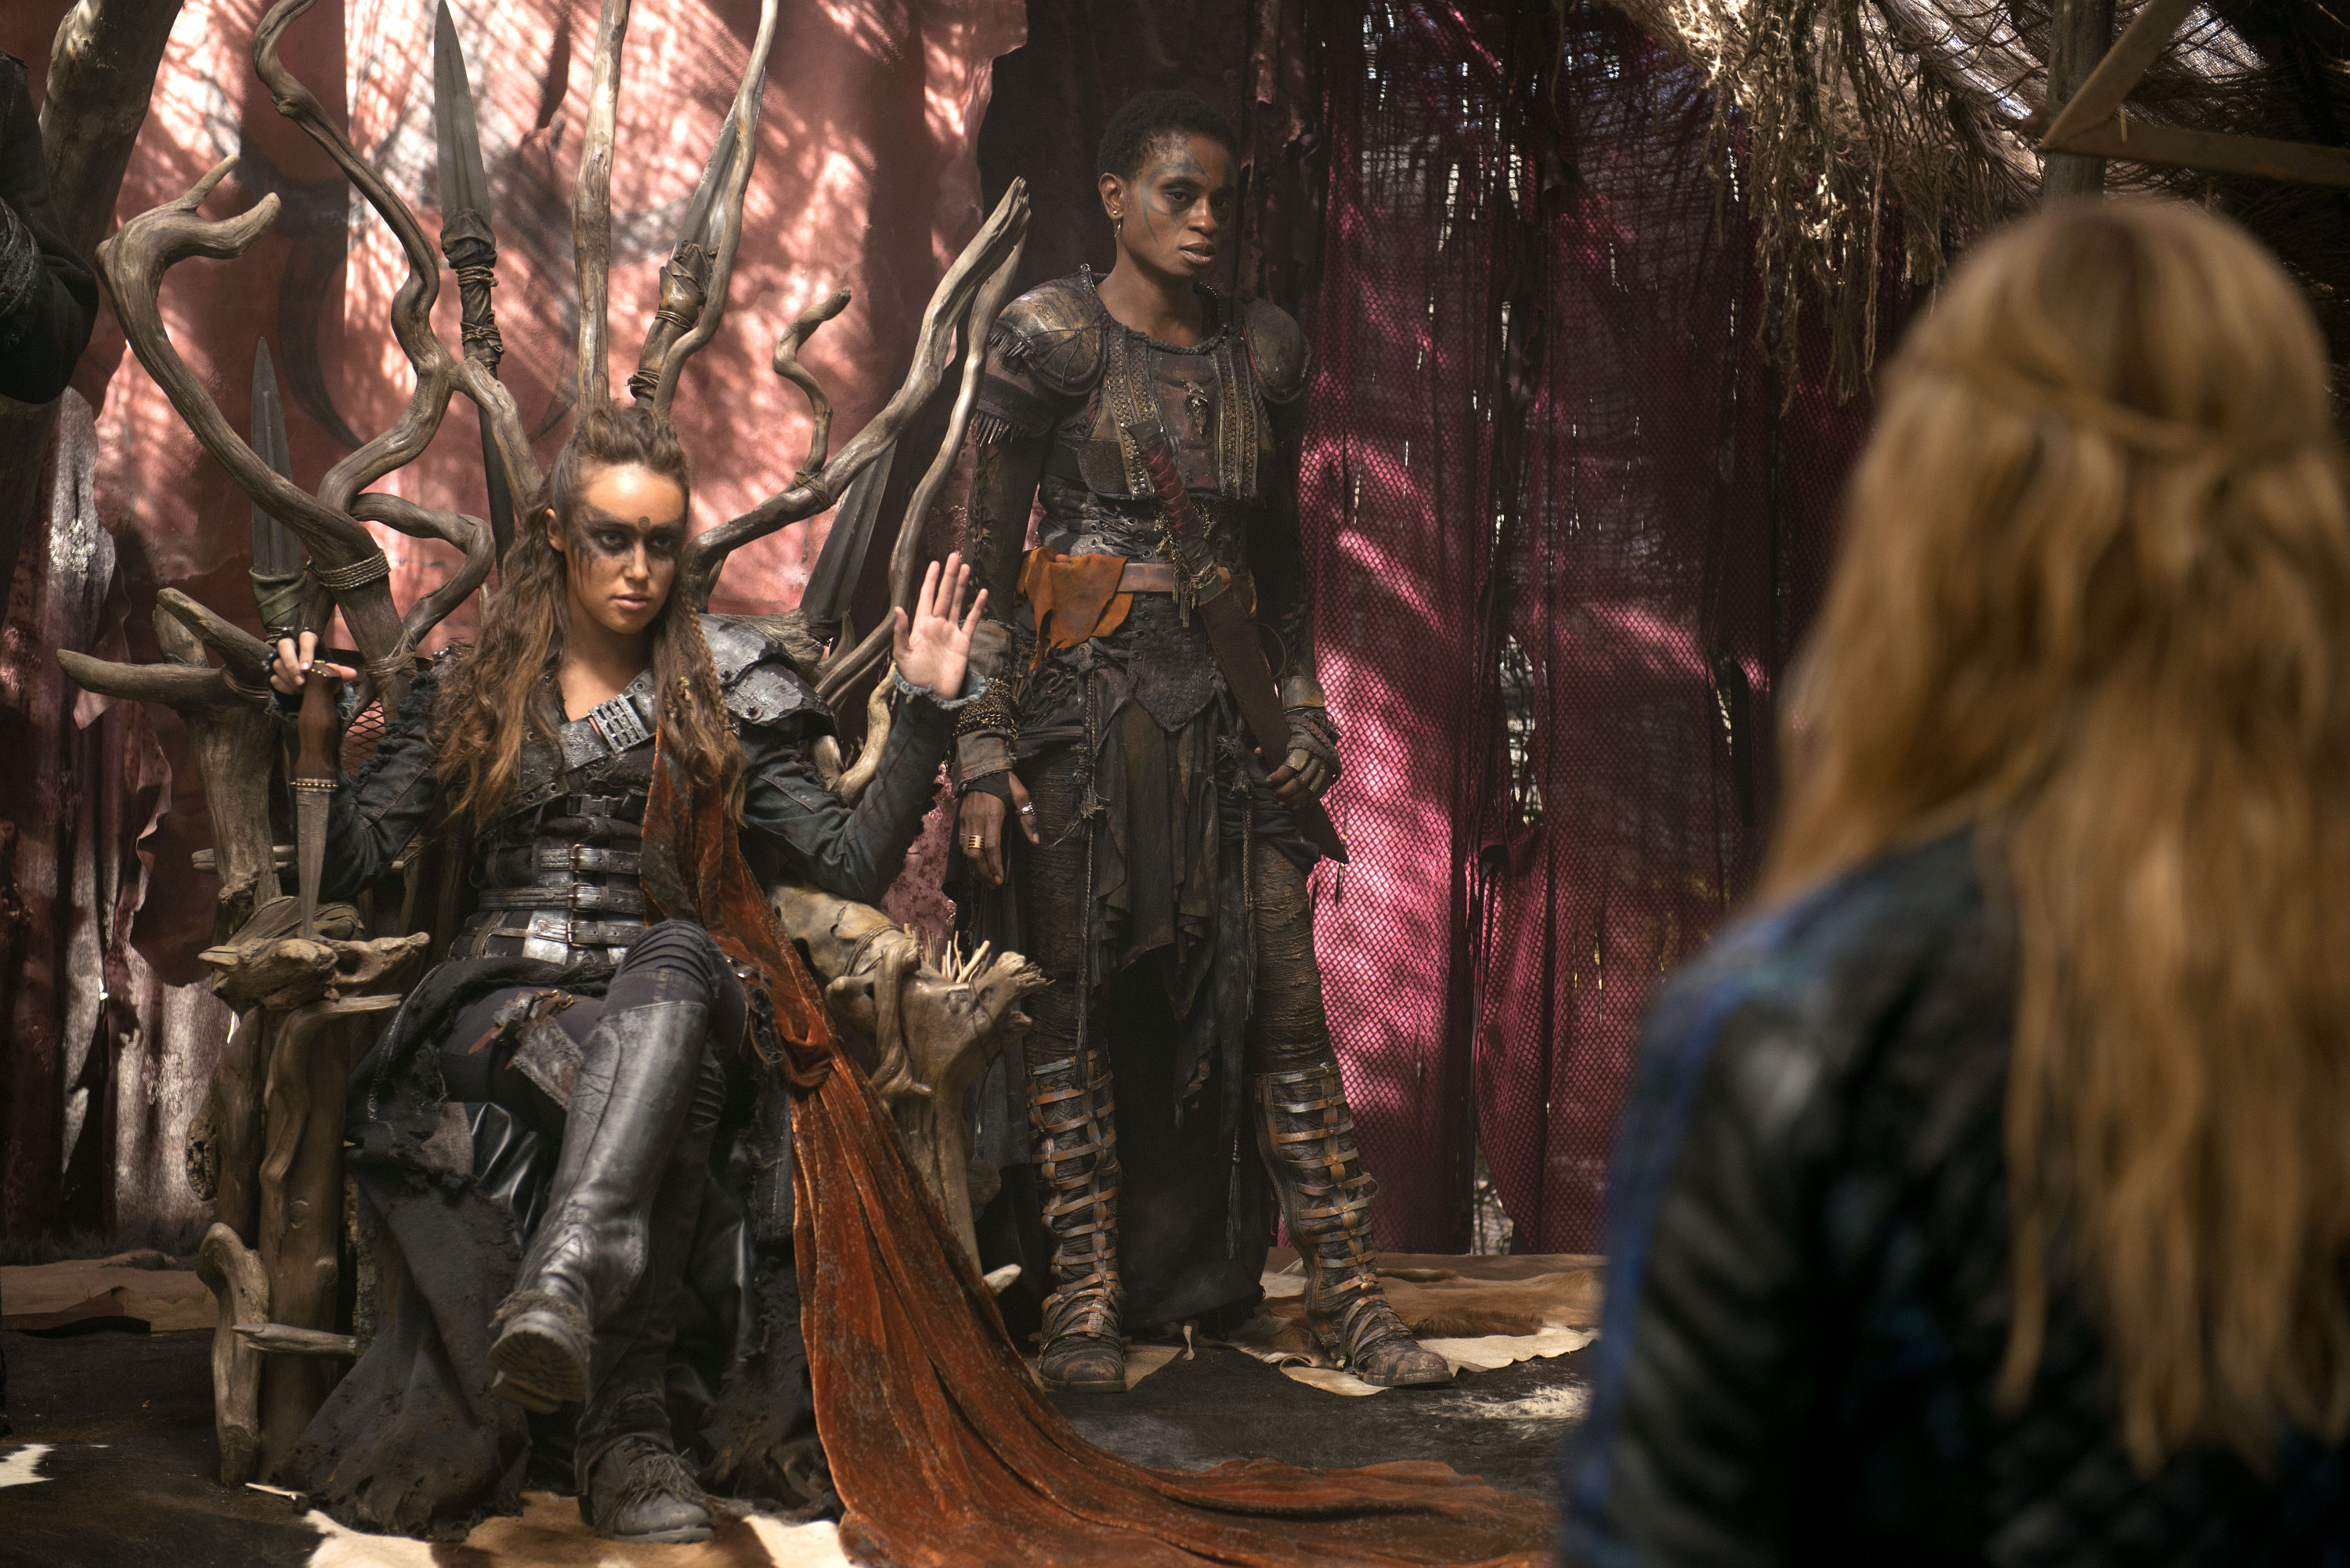 100+ Clarke And Lexa Image The100season2 Hd Wallpapers And.